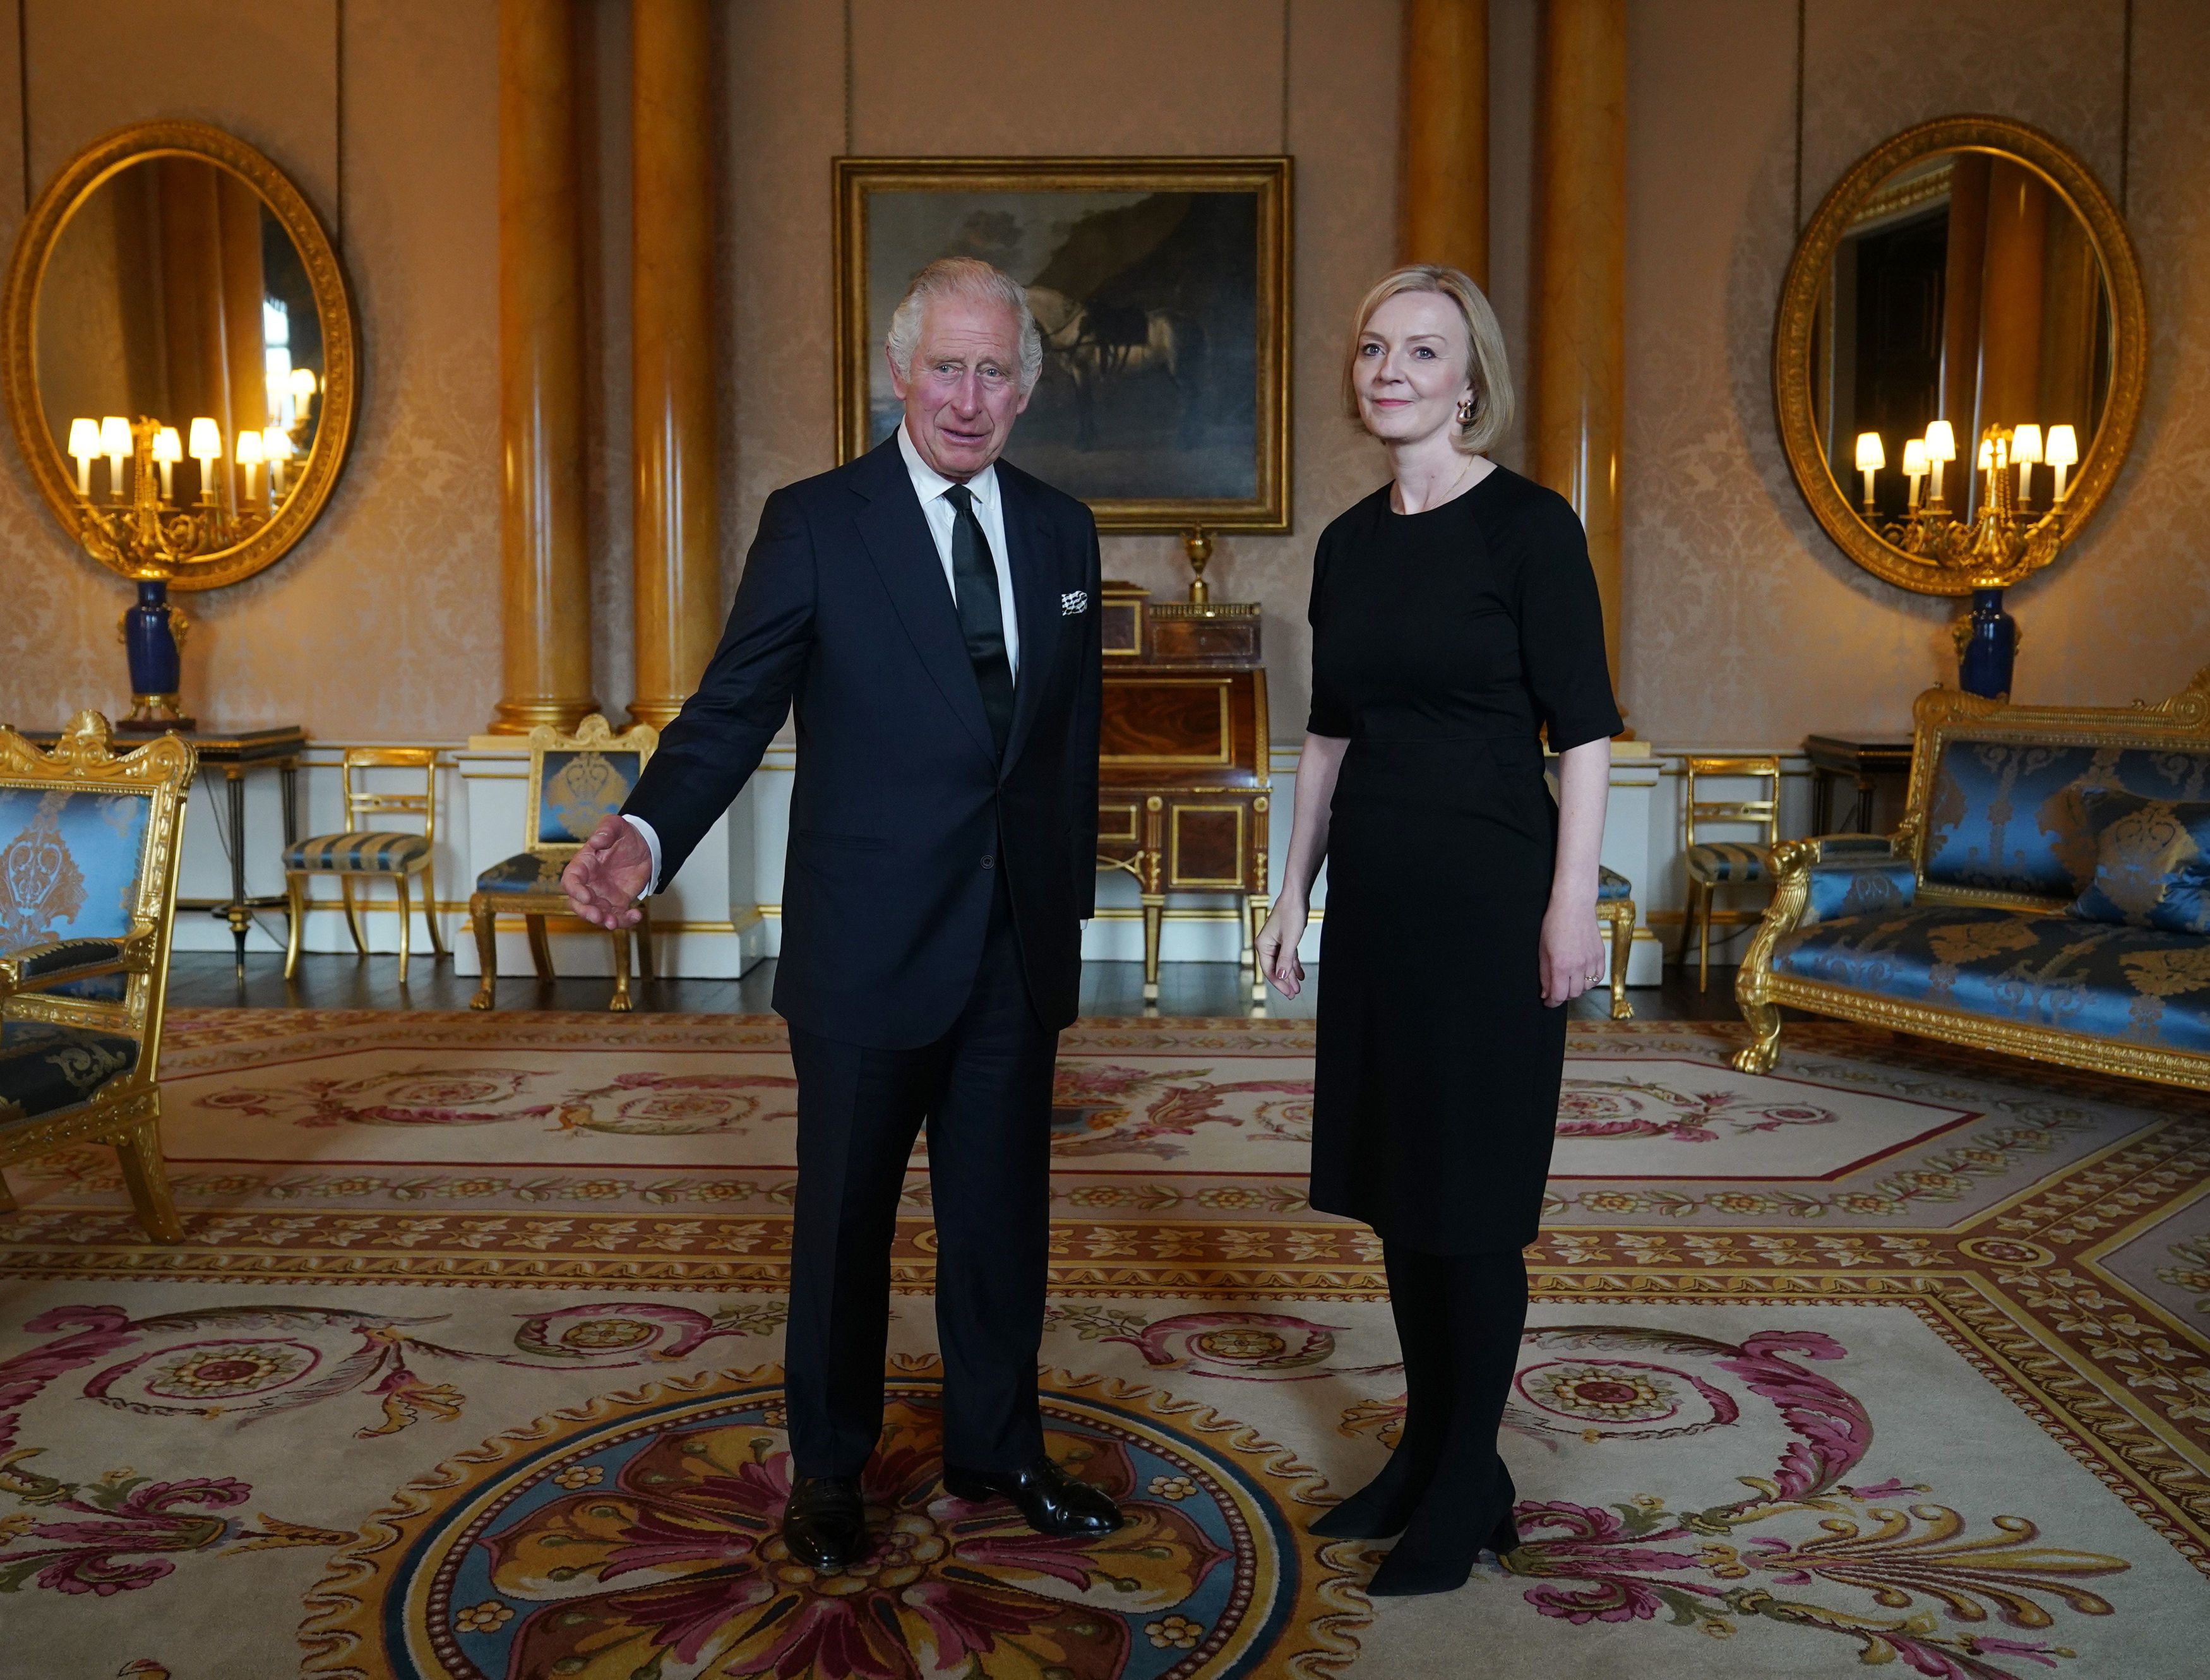 <p>King Charles III had his first audience with new Prime Minister Liz Truss at Buckingham Palace in London on Sept. 9, 2022, following <a href="https://www.wonderwall.com/celebrity/celebrities-dignitaries-react-to-death-of-queen-elizabeth-ii-647756.gallery">the death of his mother</a>, Queen Elizabeth II, one day earlier.</p>